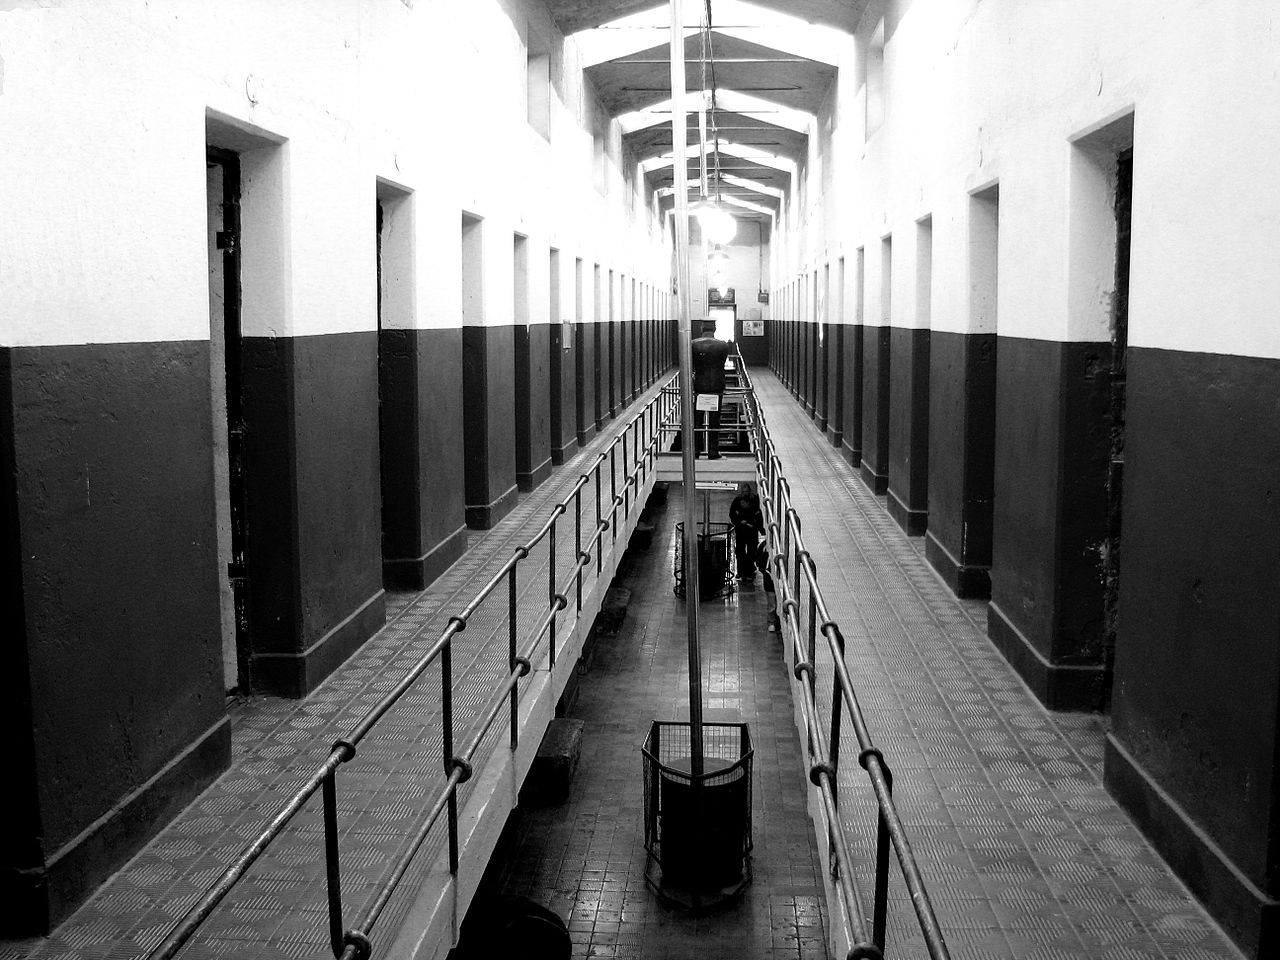 End_of_the_world_prison By Luis Argerich from Buenos Aires_Argentina - End of the world prison_CC BY 2_0